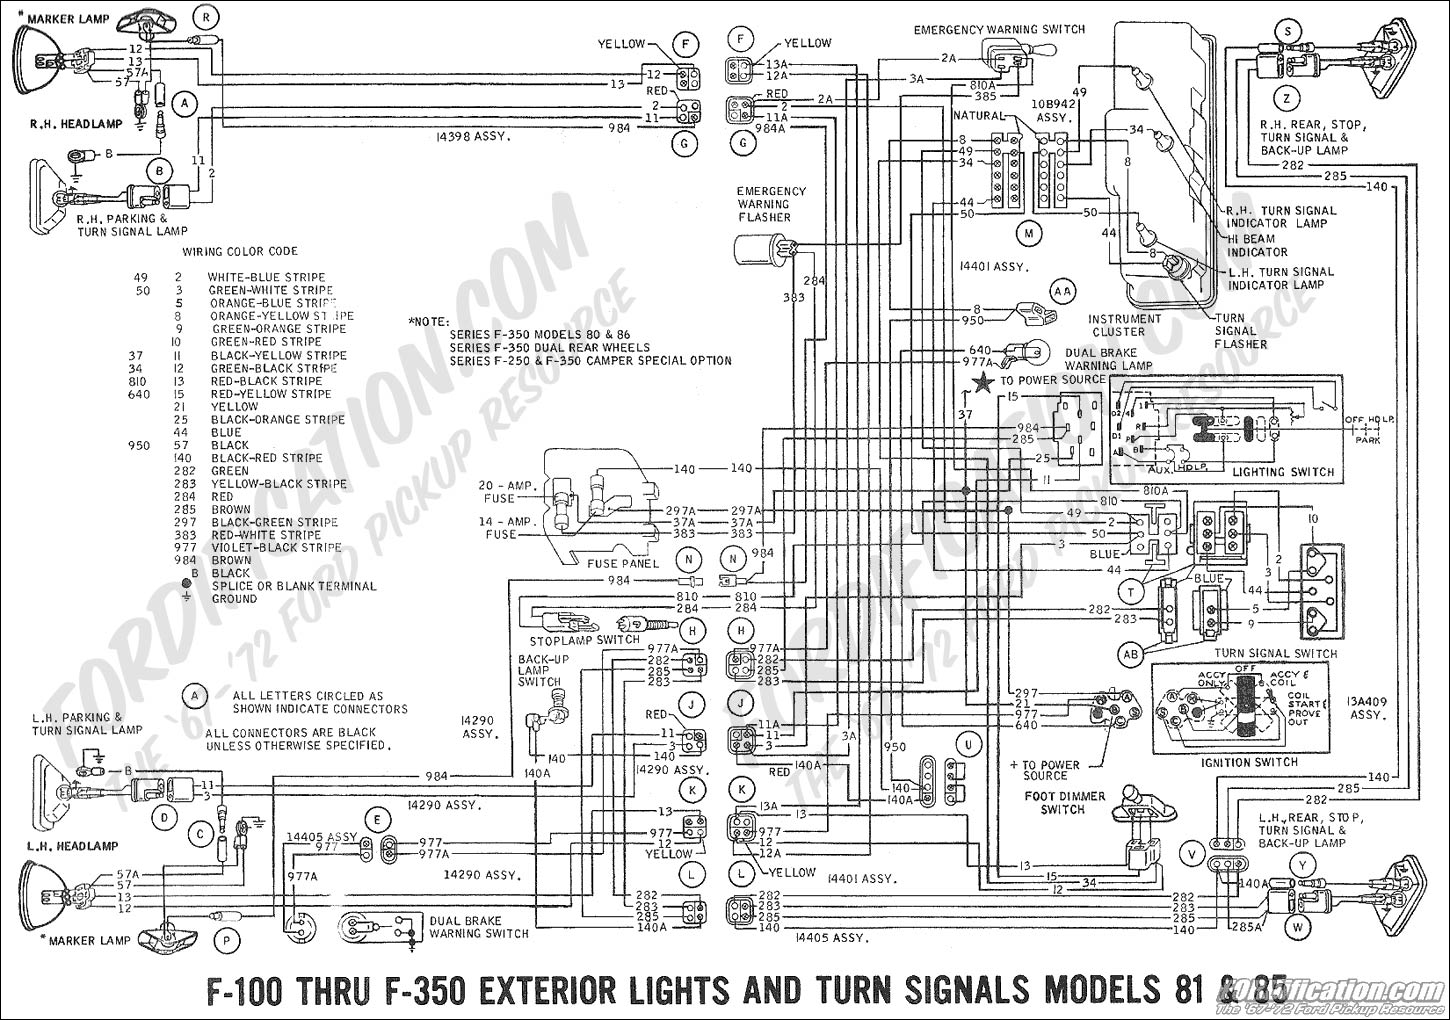 Ford Truck Technical Drawings and Schematics - Section H - Wiring Diagrams Turn Signal Switch Wiring Diagram FORDification.com